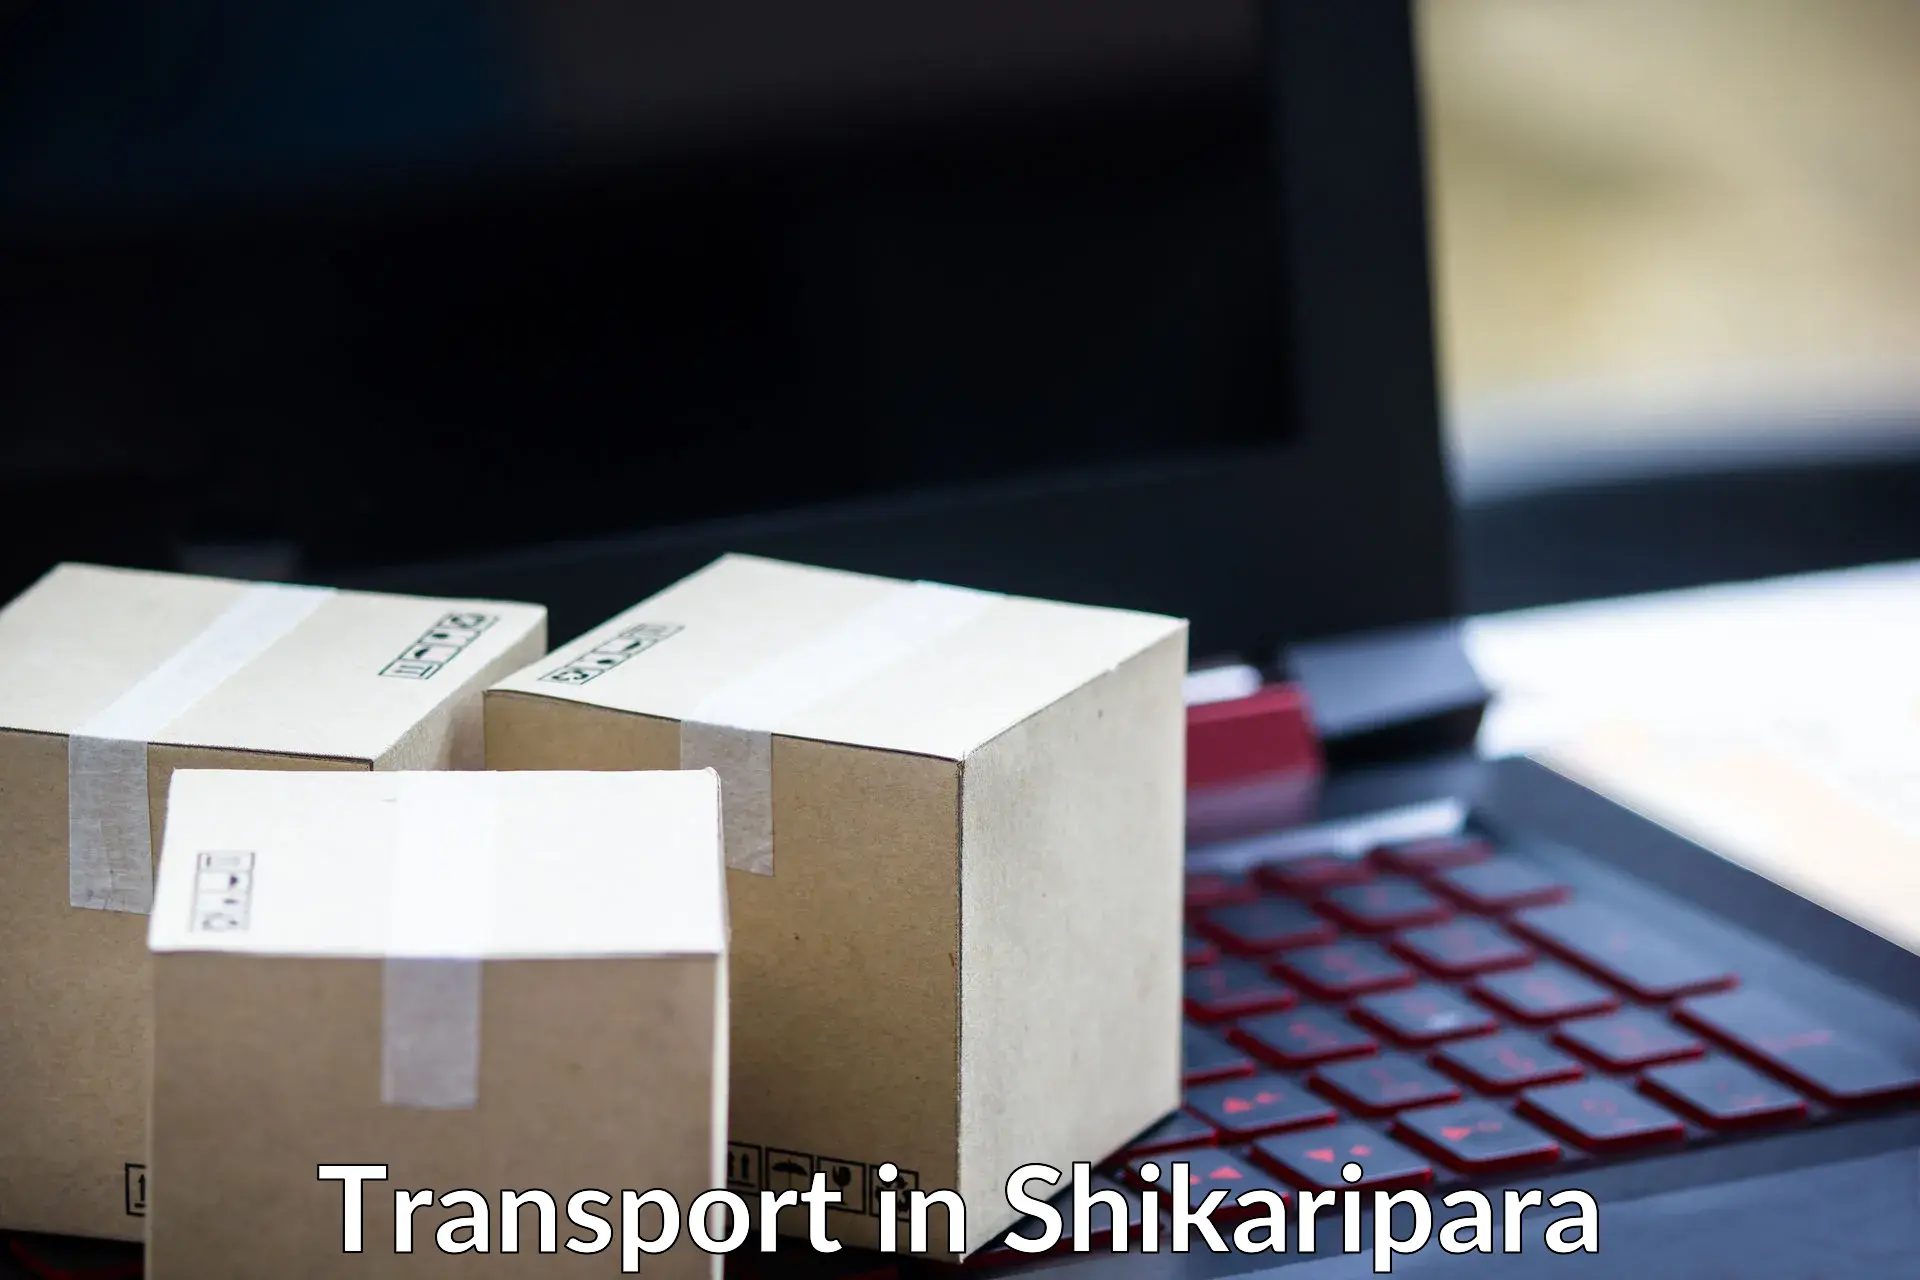 Container transportation services in Shikaripara